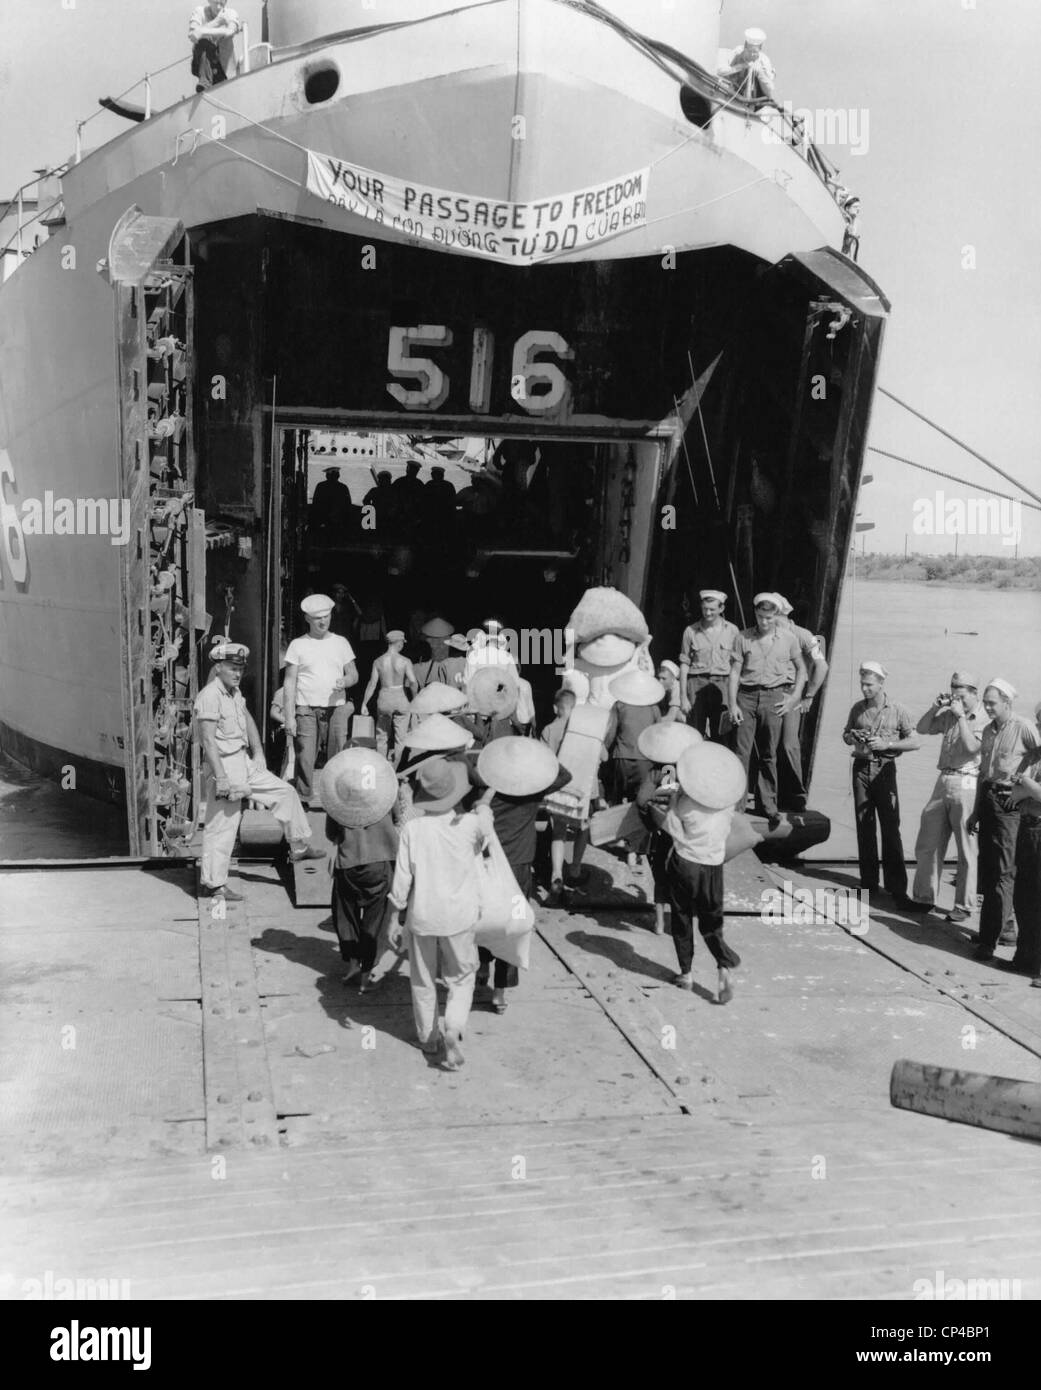 North Vietnamese refugees board an US ship bound for Saigon, South Vietnam. The ship bears a sign reading, YOUR PASSAGE TO Stock Photo